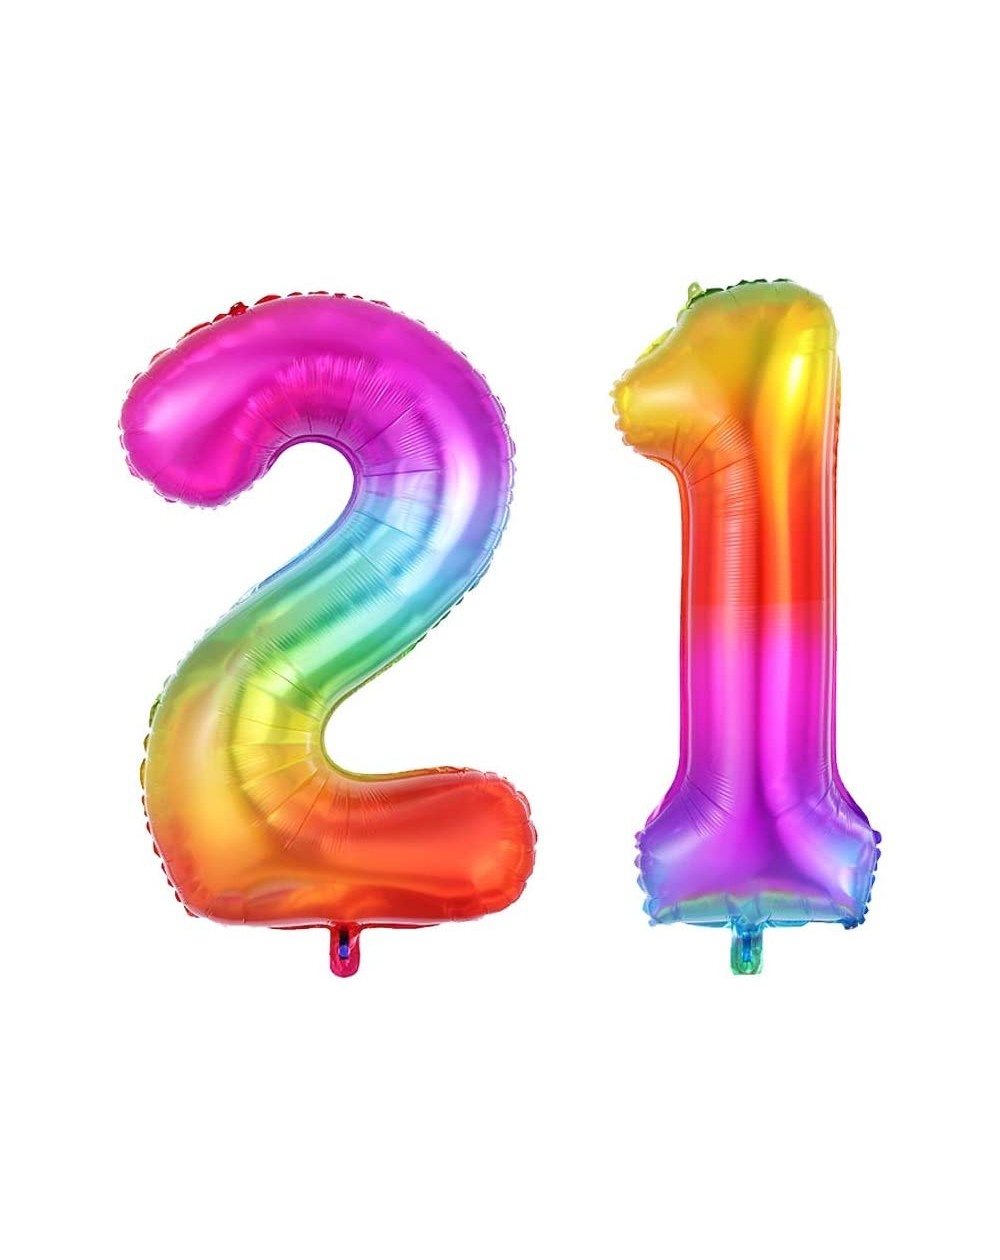 Balloons 40inch Rainbow Jelly 21 Balloon Jumbo Foil Helium Number Balloons for Festival Anniversary Birthday Party Decoration...